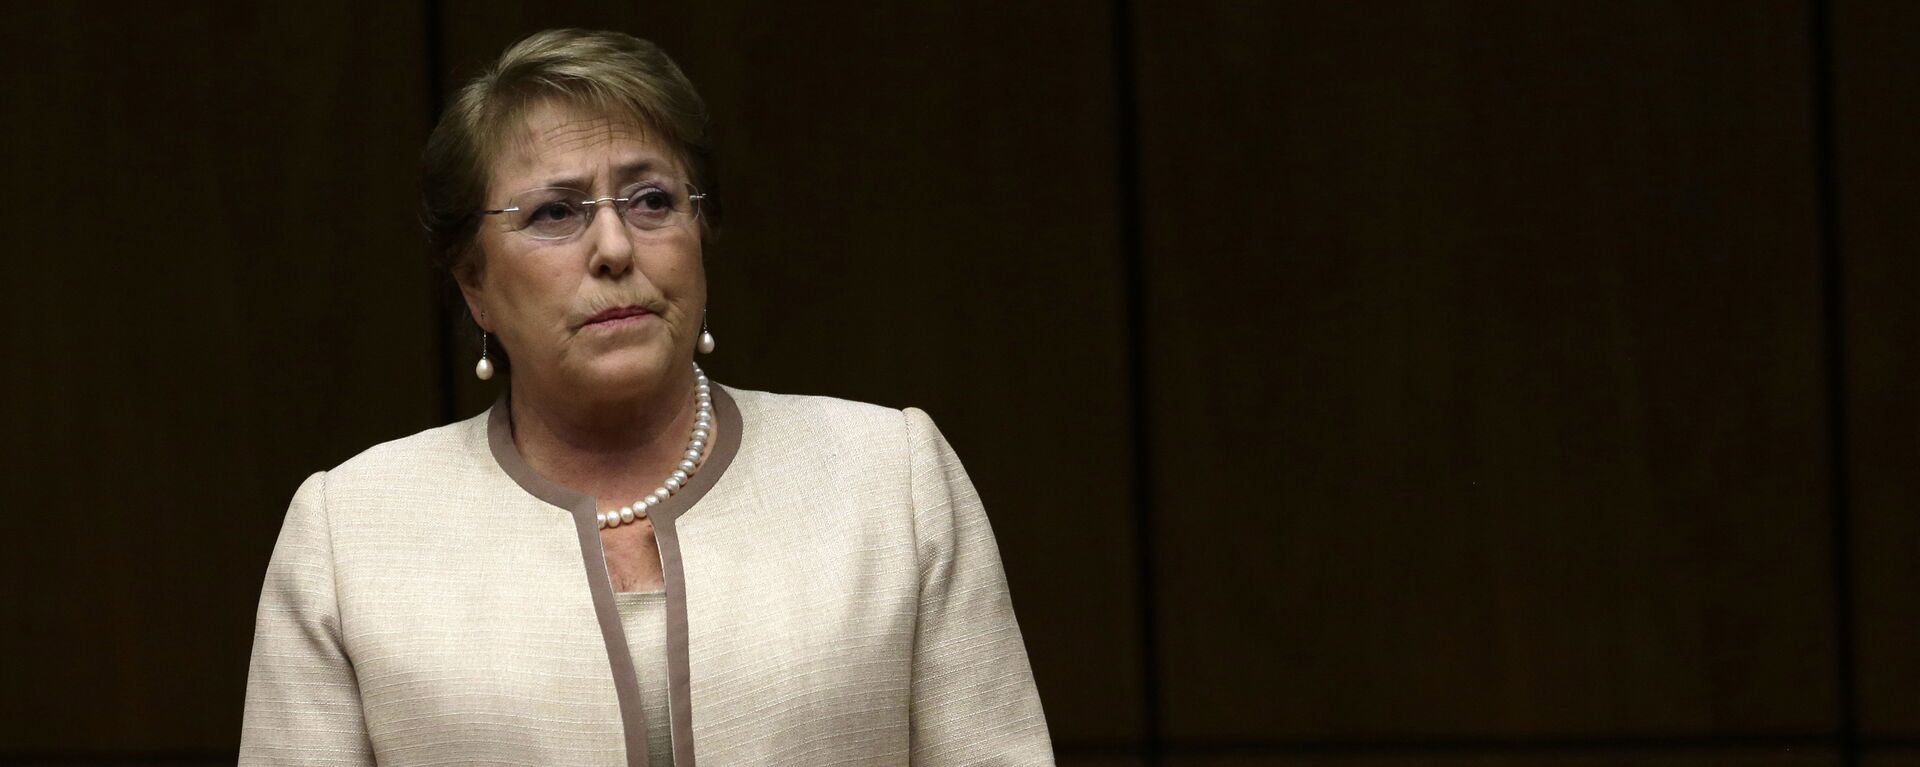 In this Aug. 21, 2015, file photo, Chile's President Michelle Bachelet attends a congressional session, during her official visit, in Asuncion, Paraguay - Sputnik Mundo, 1920, 24.06.2022